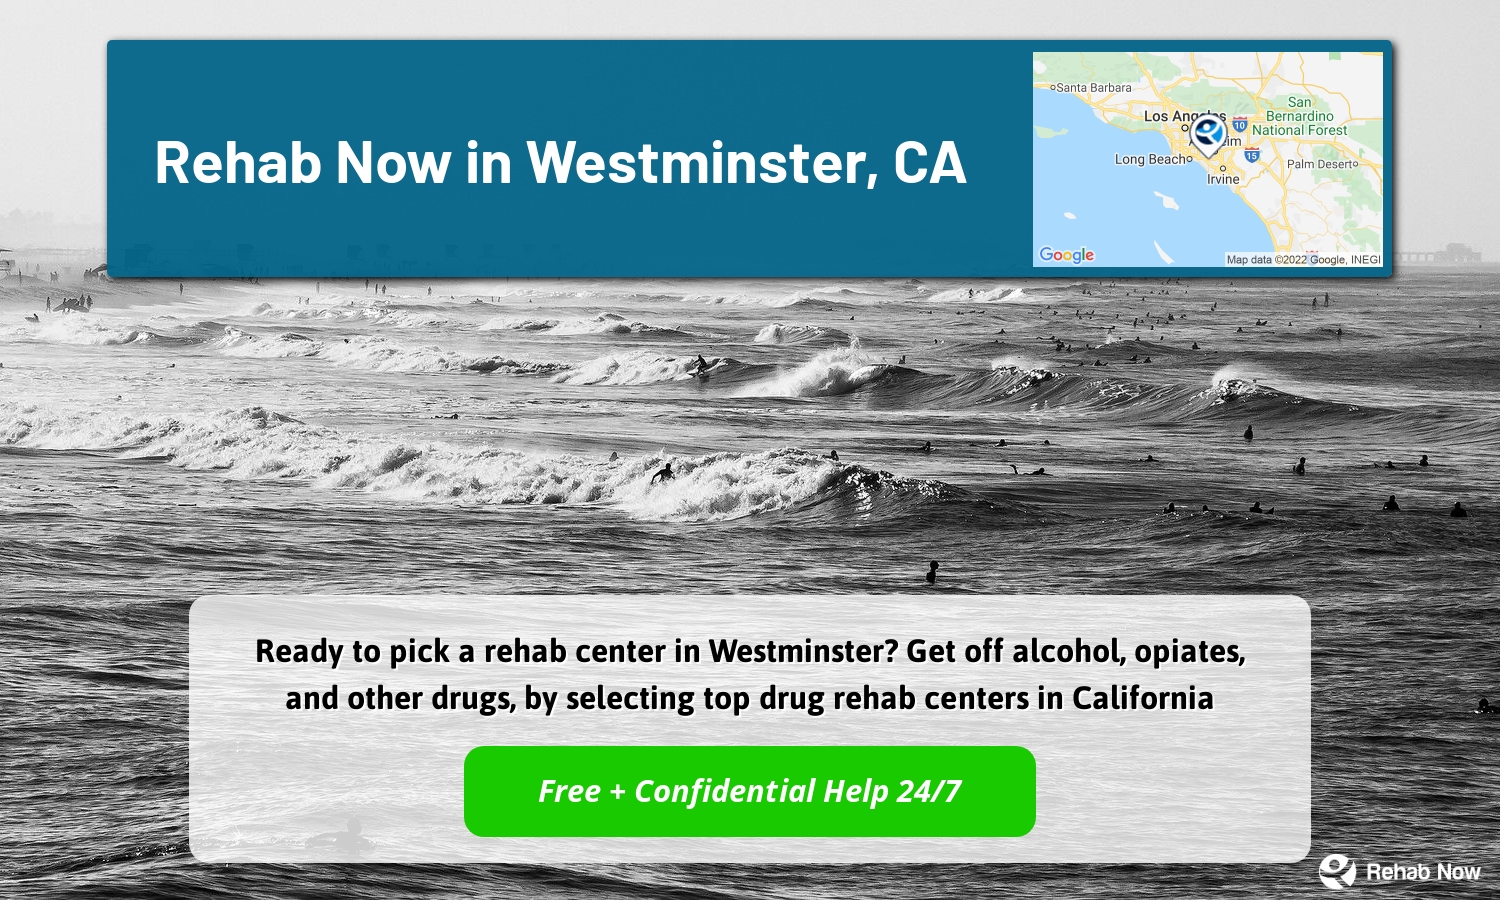 Ready to pick a rehab center in Westminster? Get off alcohol, opiates, and other drugs, by selecting top drug rehab centers in California